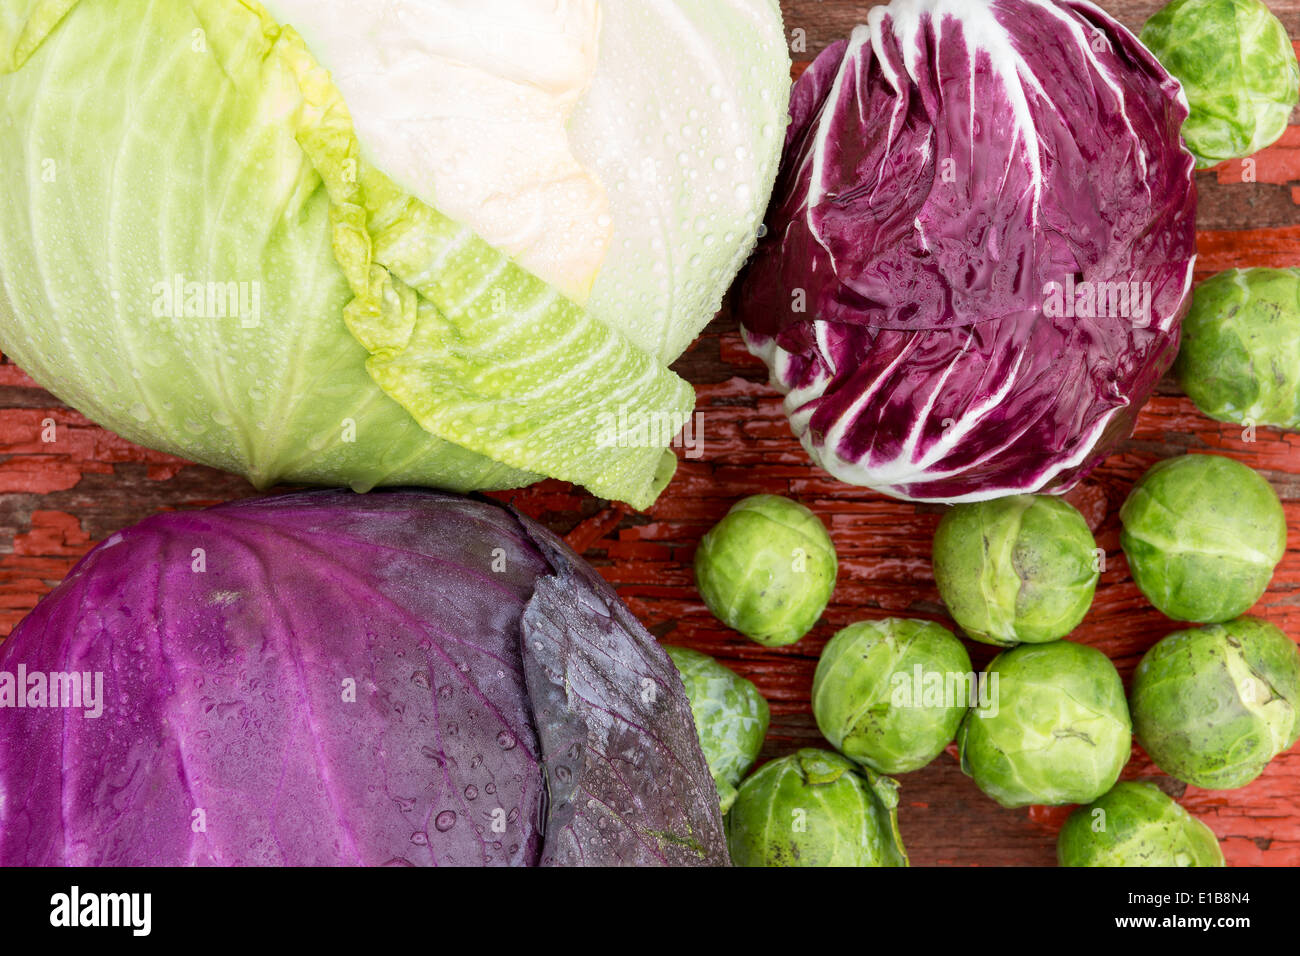 Close up overhead view of a selection of different fresh crucifies including green cabbage, red cabbage, radicchio and brussels Stock Photo